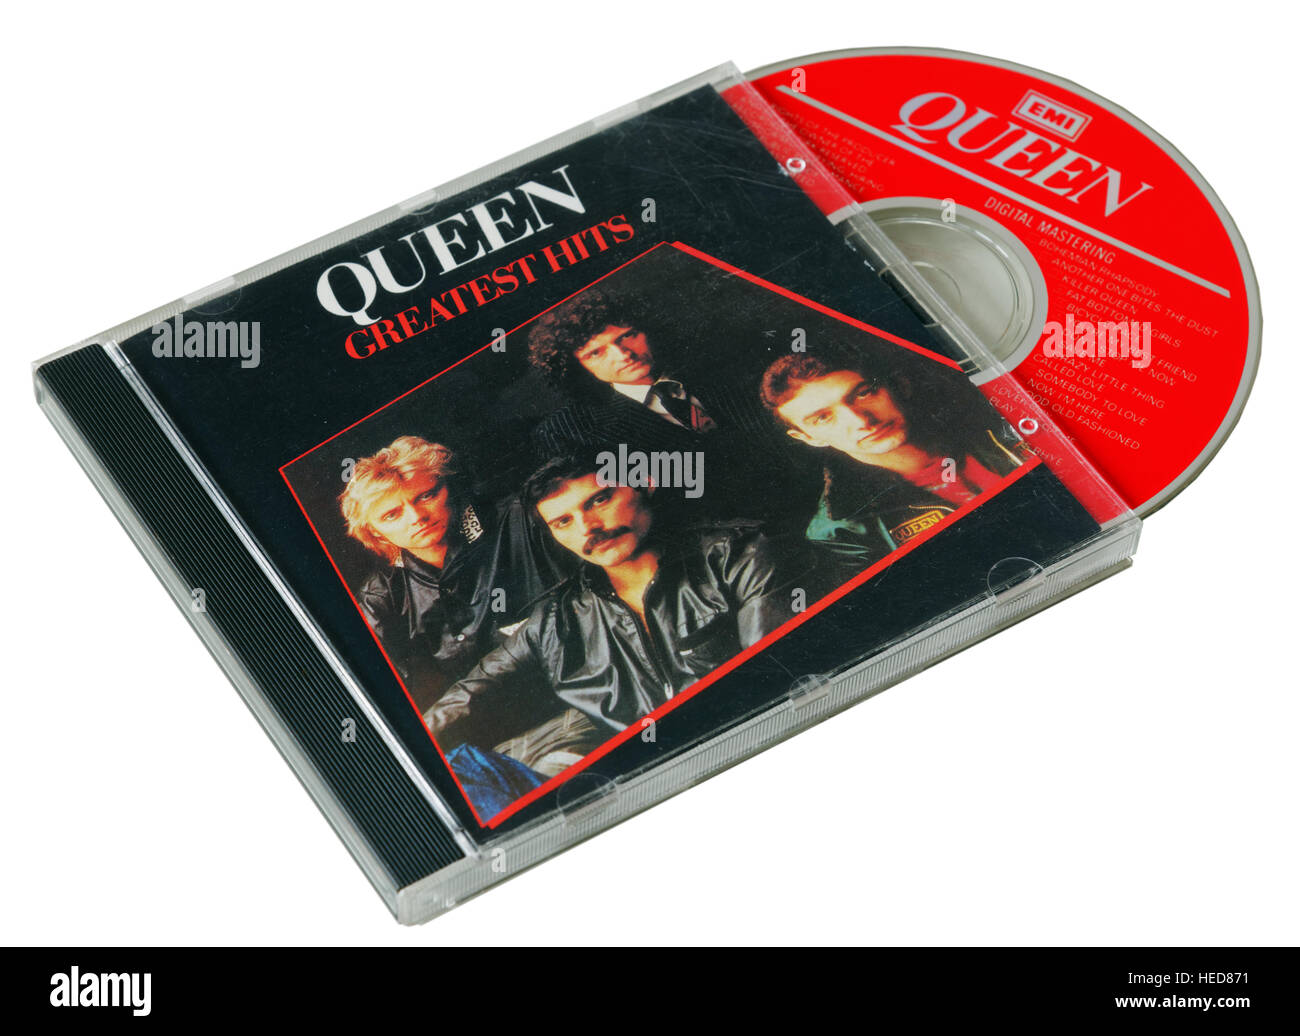 Queen Greatest Hits CD Stock Photo - Alamy